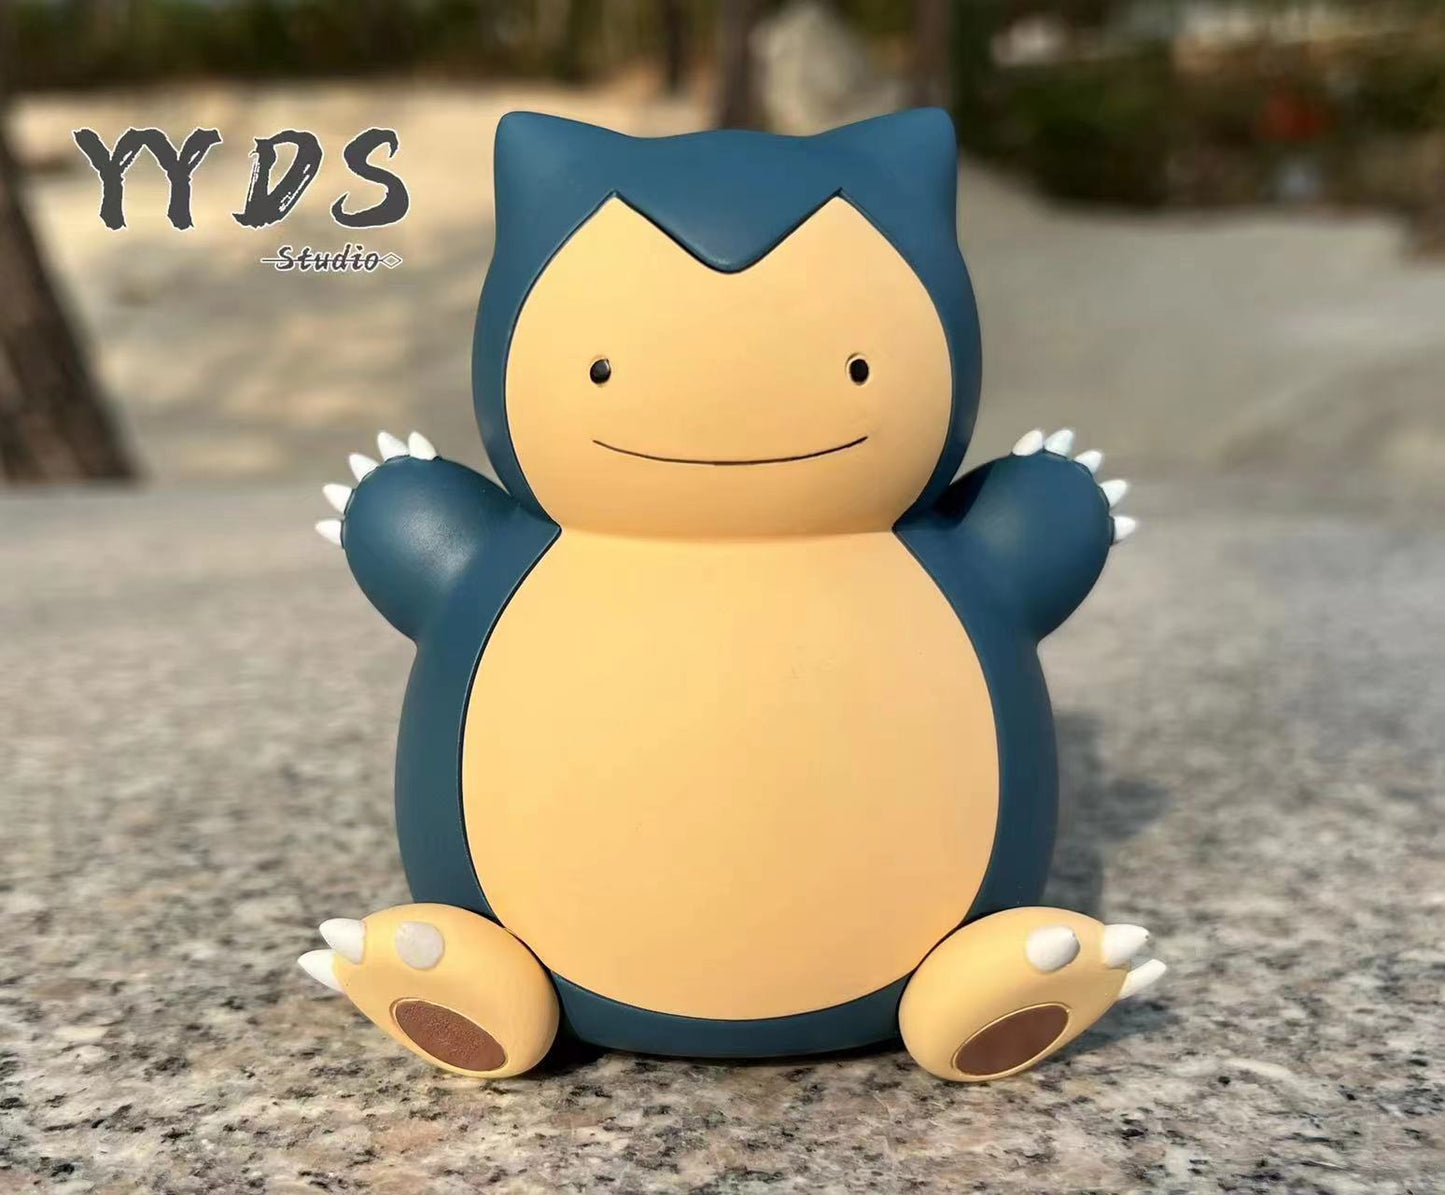 〖Sold Out〗Pokémon Peripheral Products Ditto Snorlax - YYDS Studio